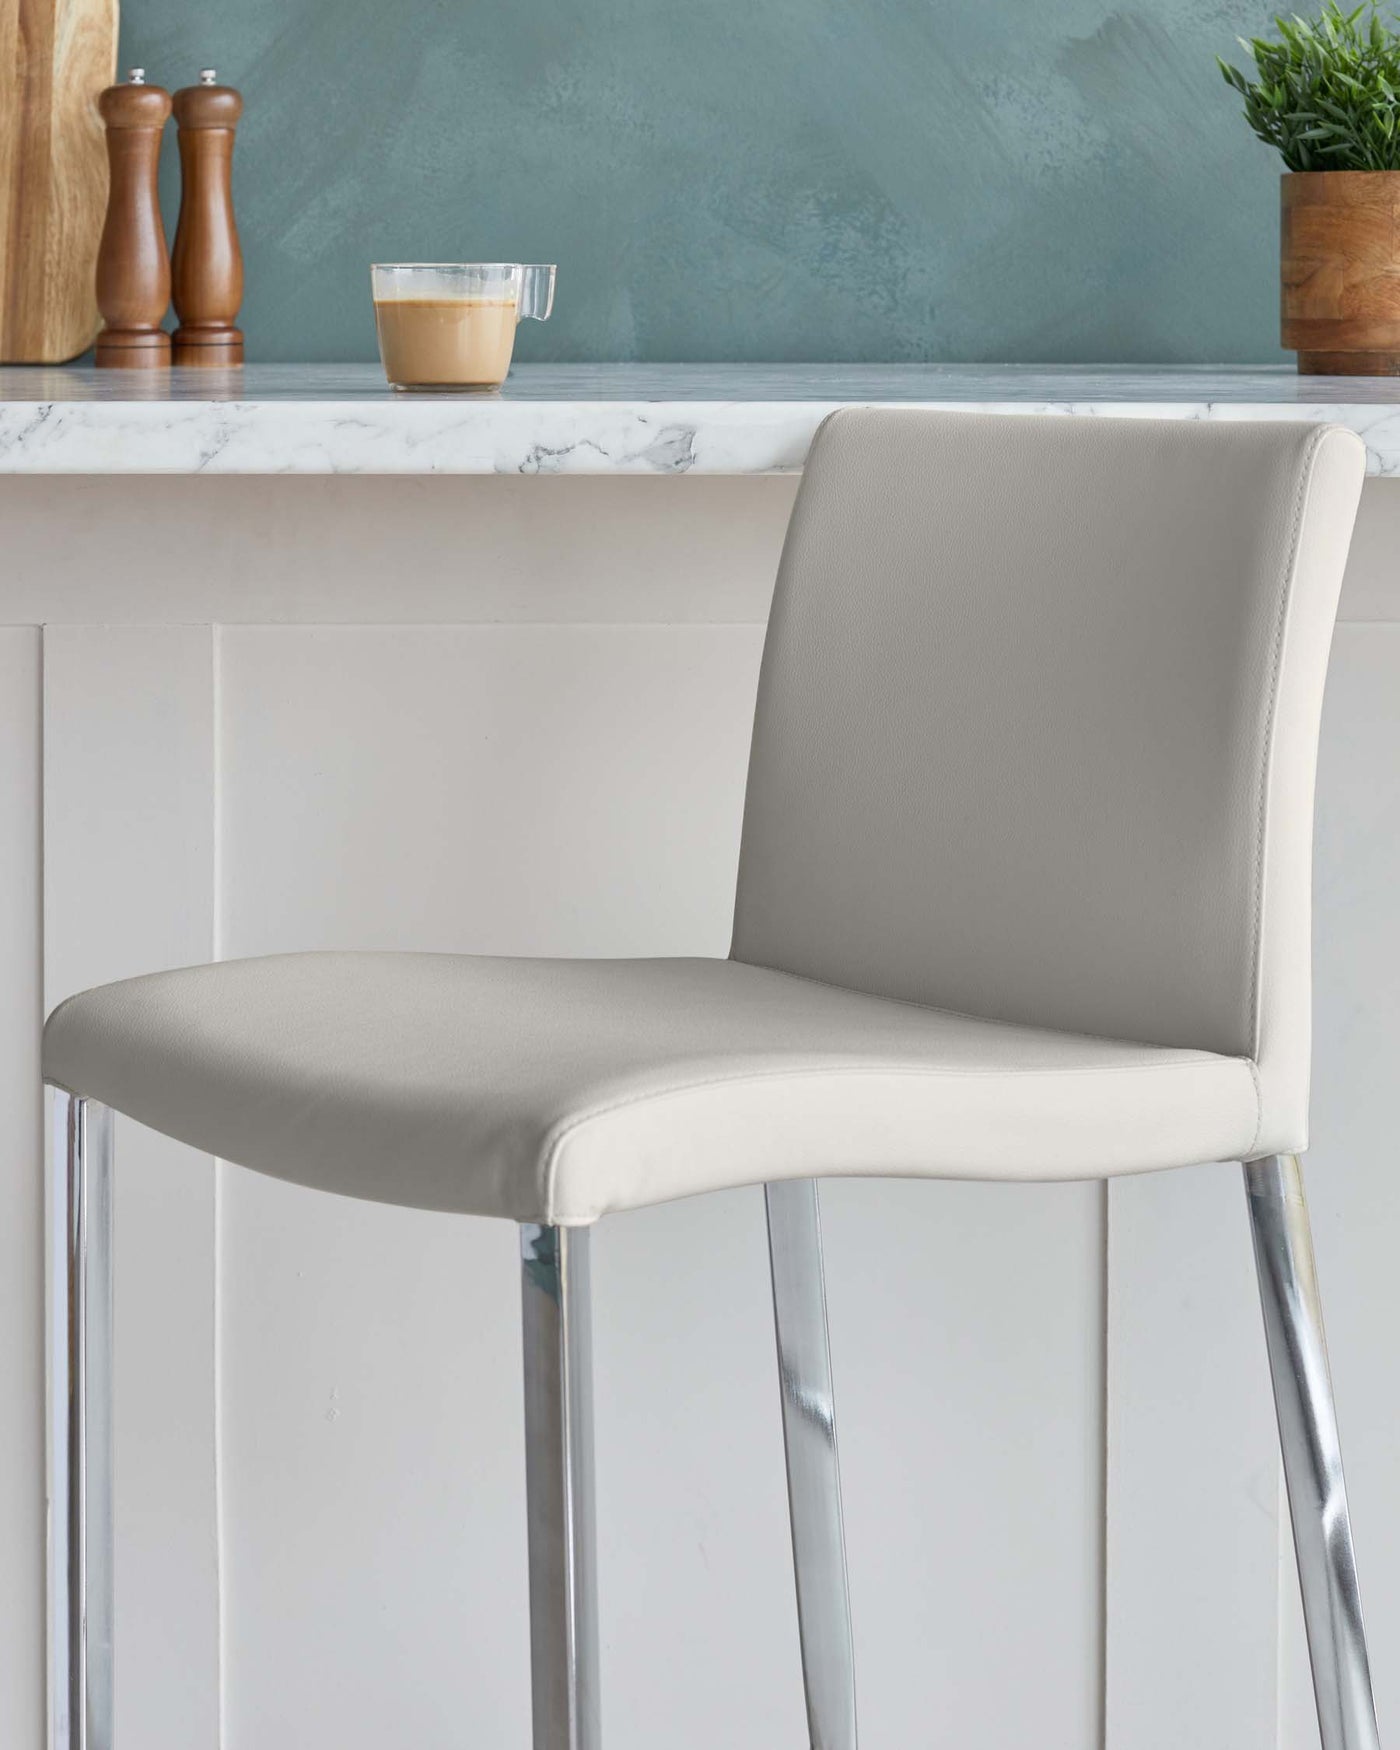 Modern bar stool with a sleek silver chrome frame and a smooth light grey faux leather seat, displayed against a kitchen counter.